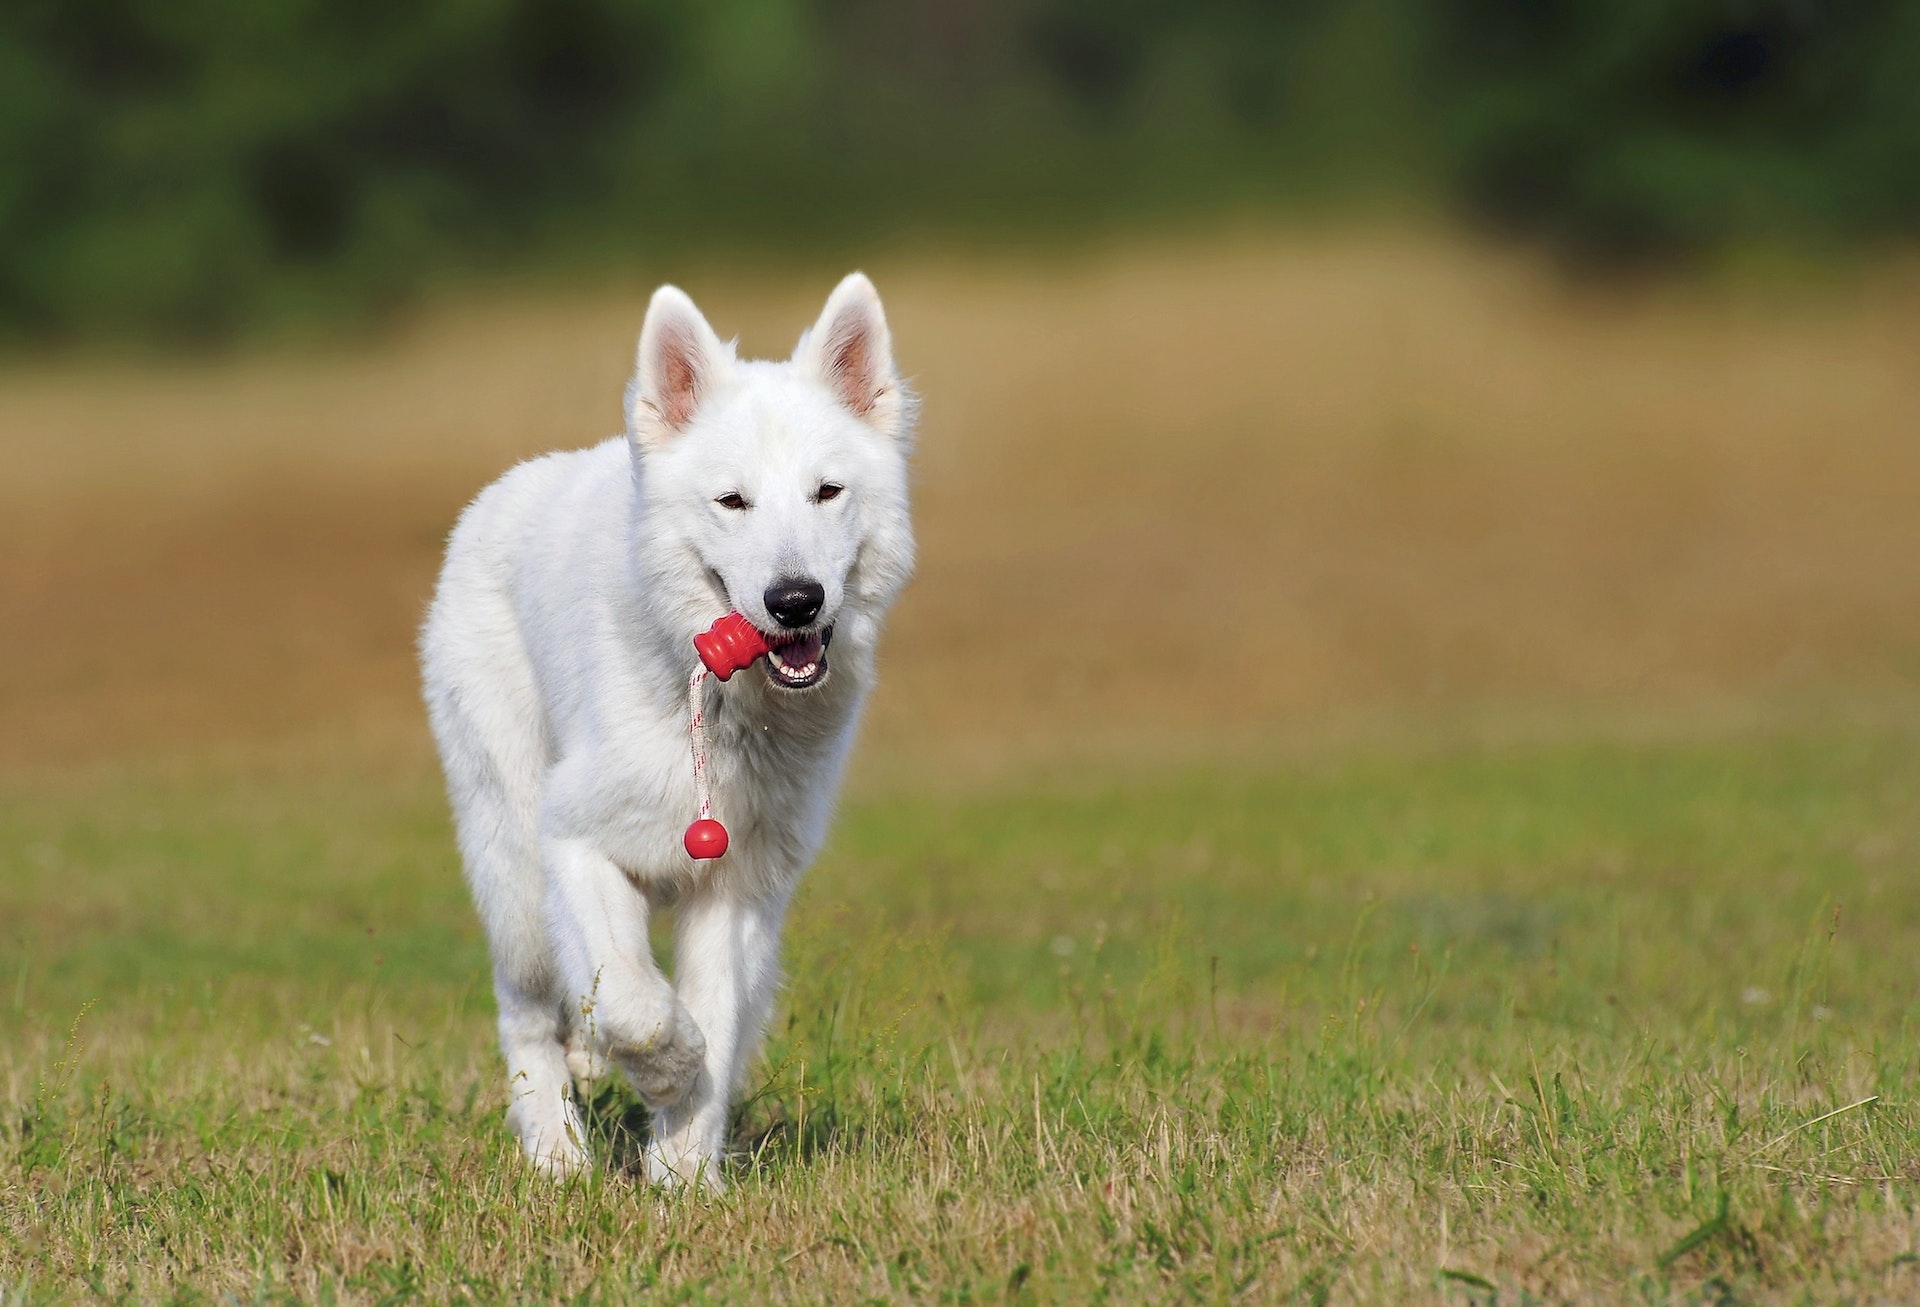 Are You Struggling To Train Your New Dog?